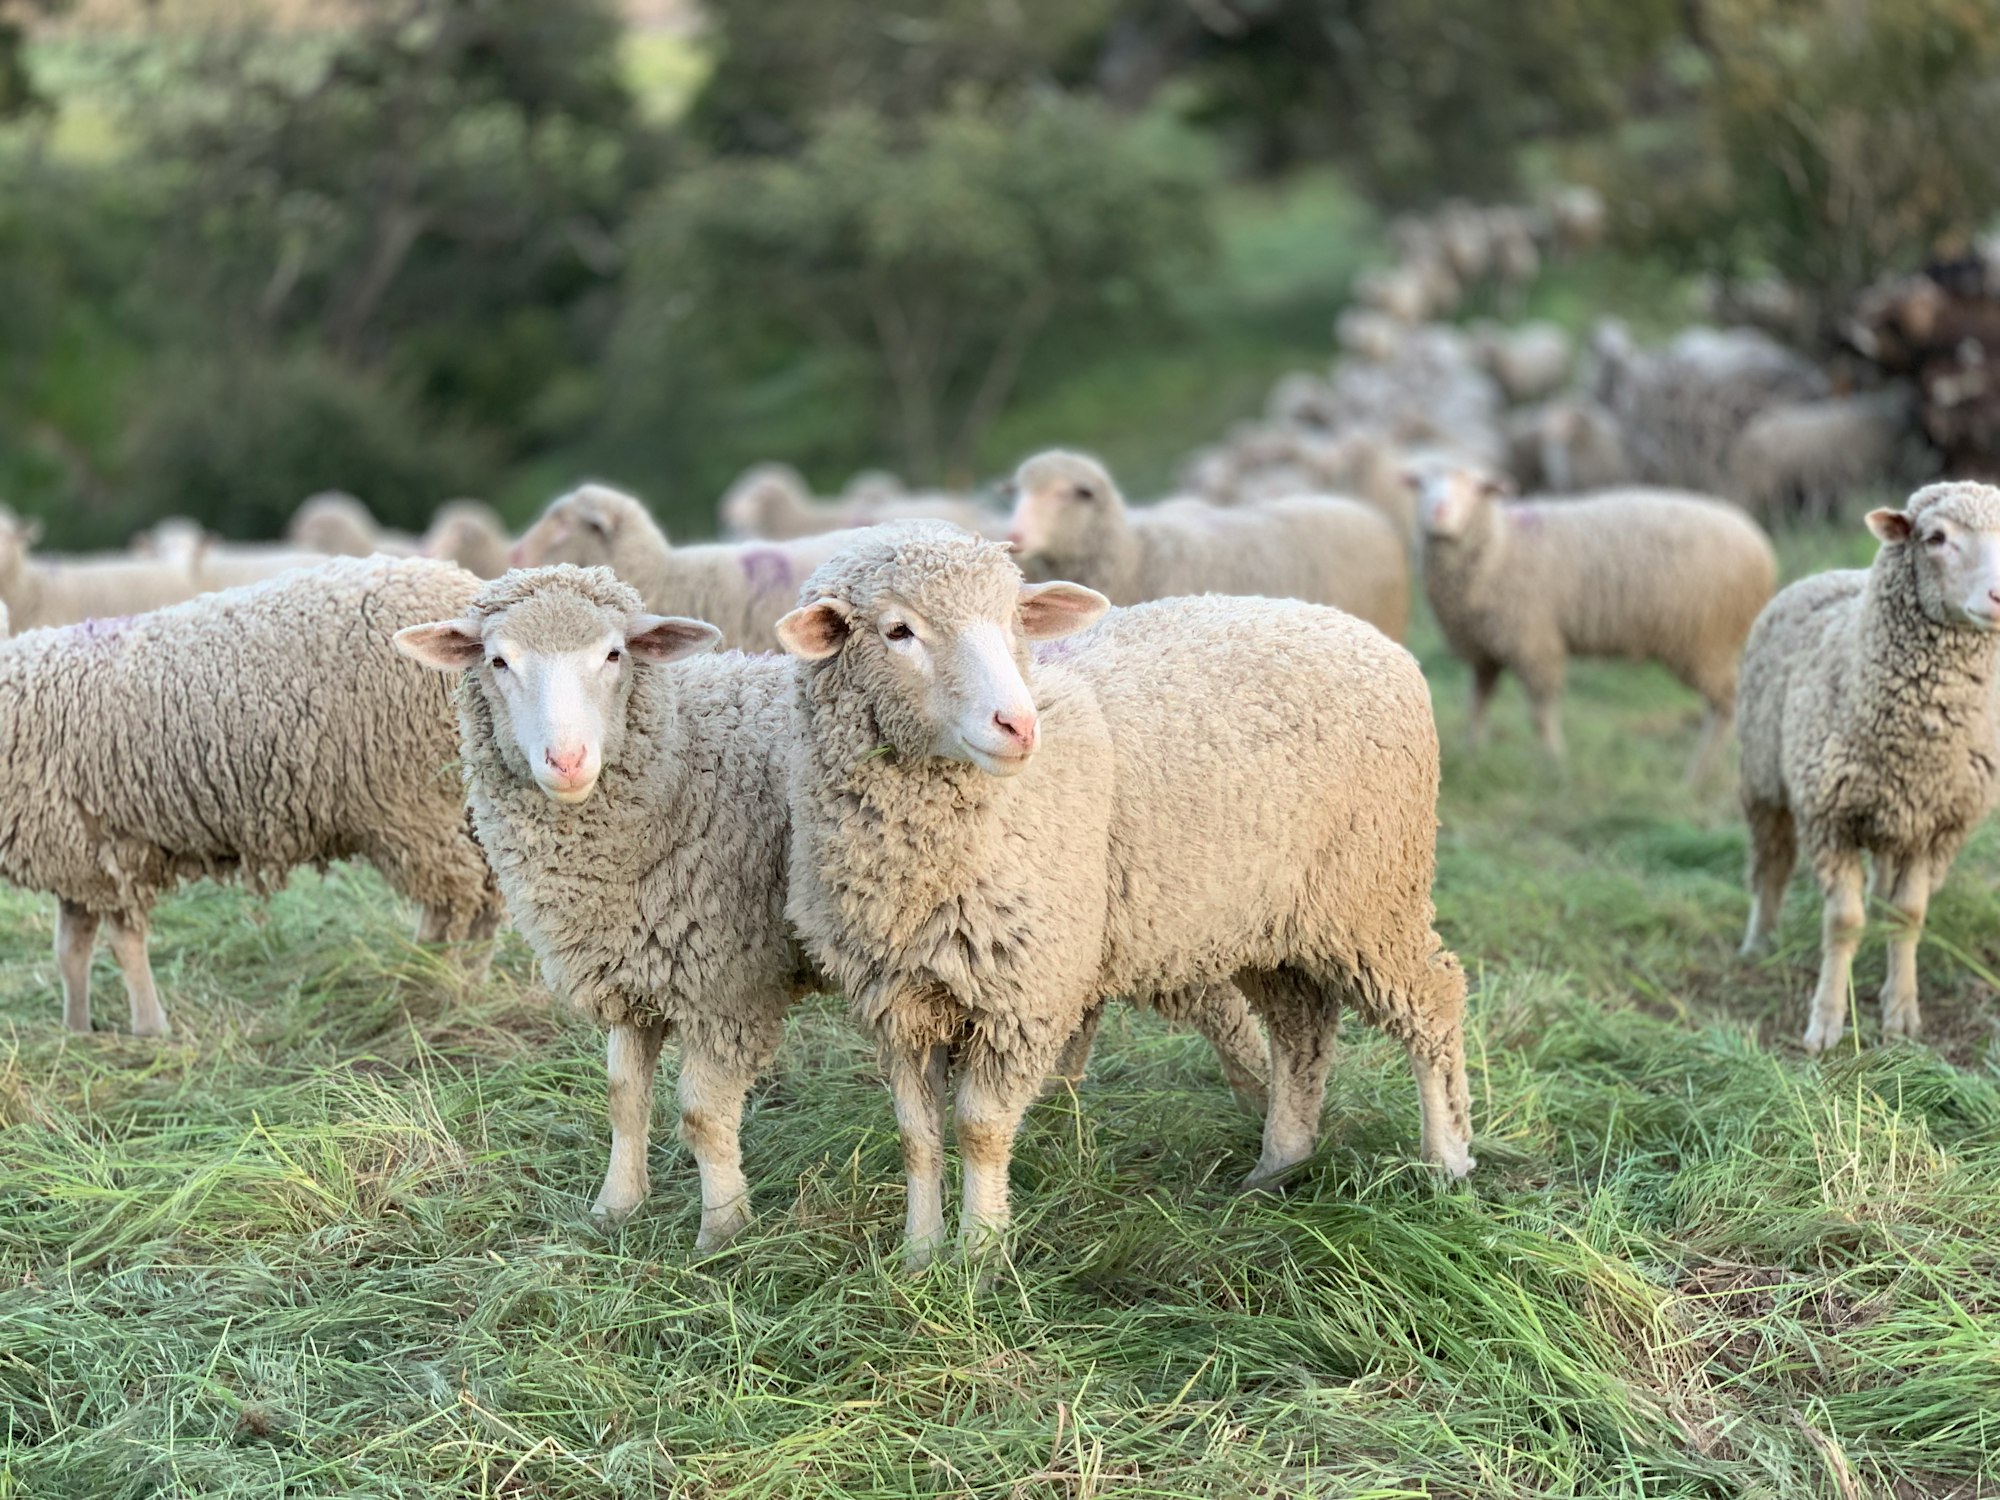 Sheep grazing at the San Marcos Foothills Preserve in Santa Barbara California as part of a habitat restoration strategy to reduce non-native annual grasses and promote the restoration of healthy grasslands.